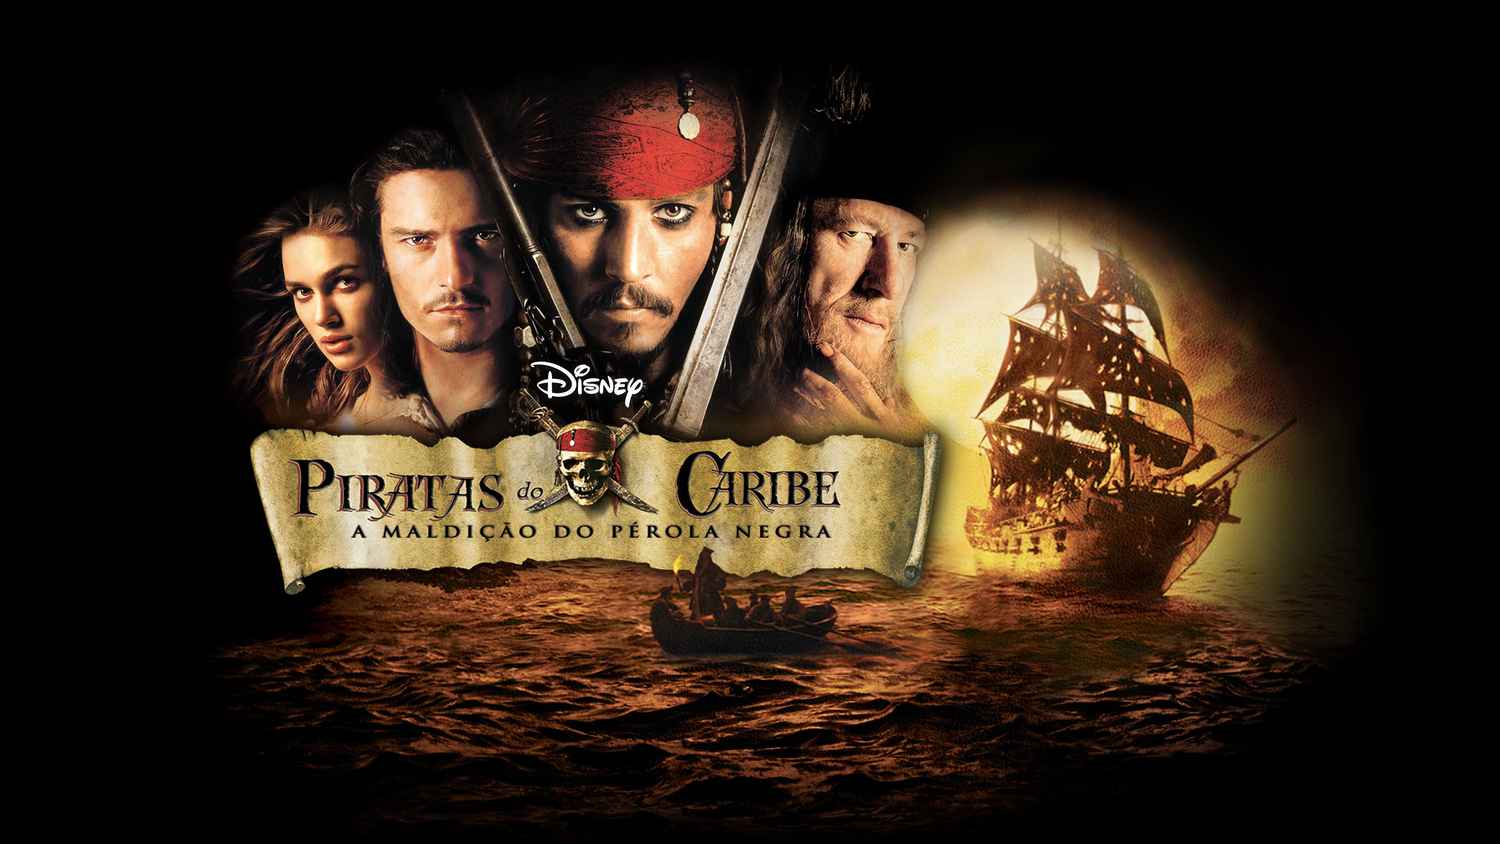 watch pirates of the caribbean 2 full movie onine free